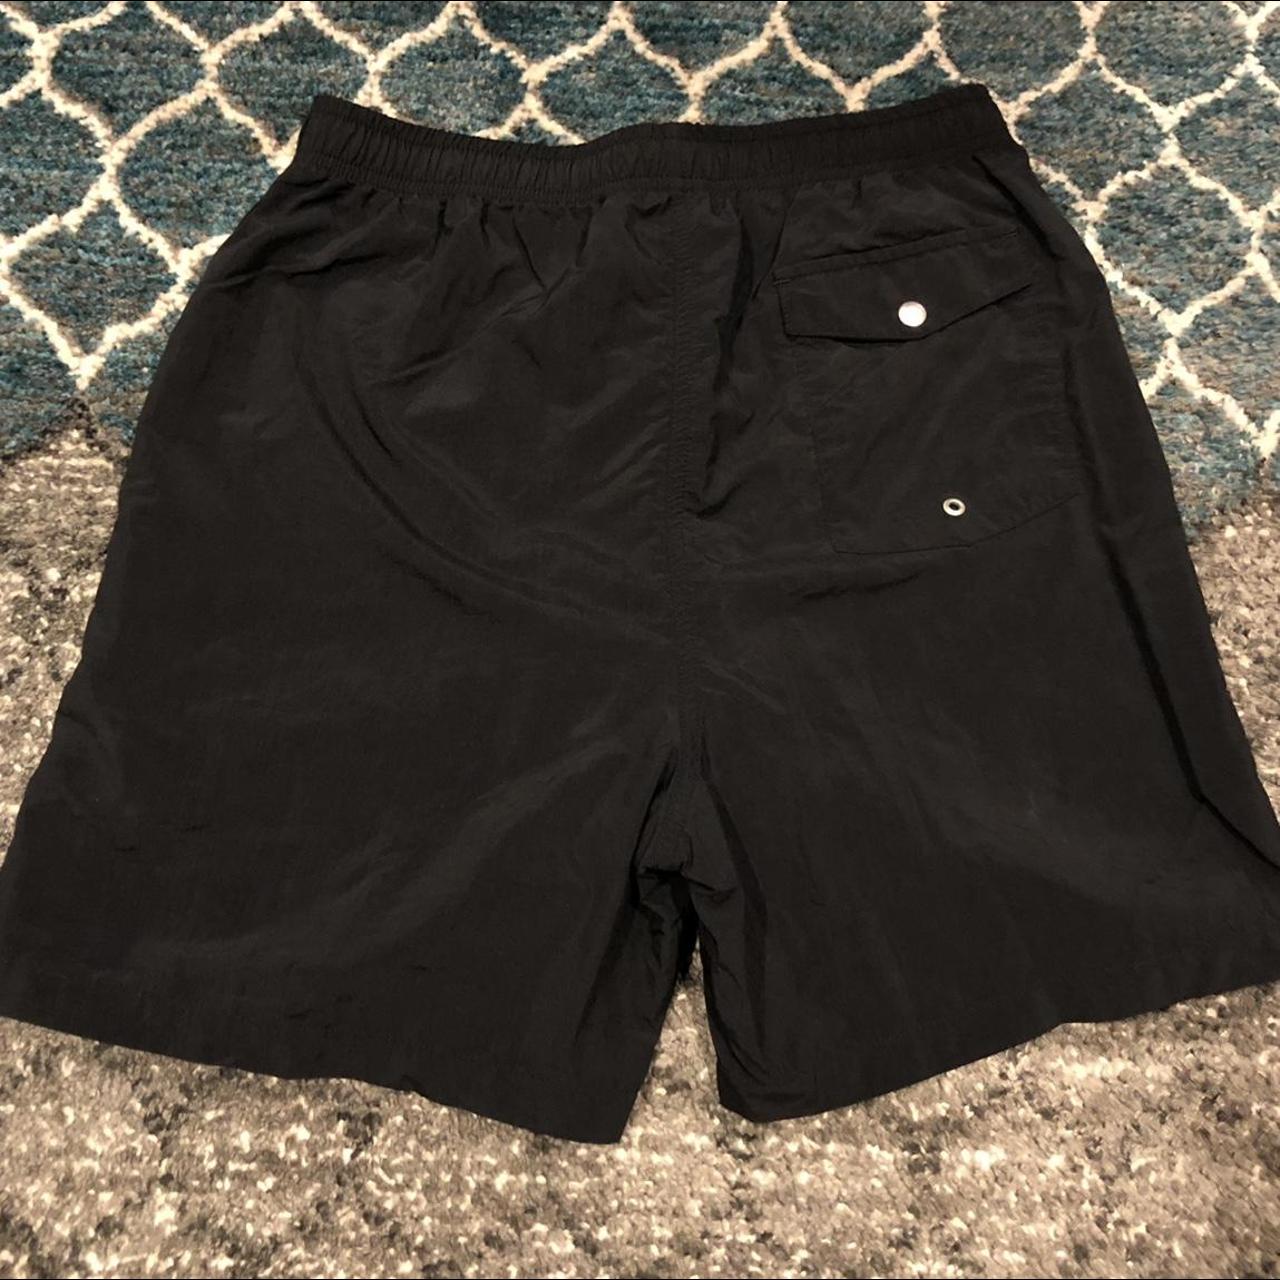 Product Image 2 - •Noah swim trunks in a